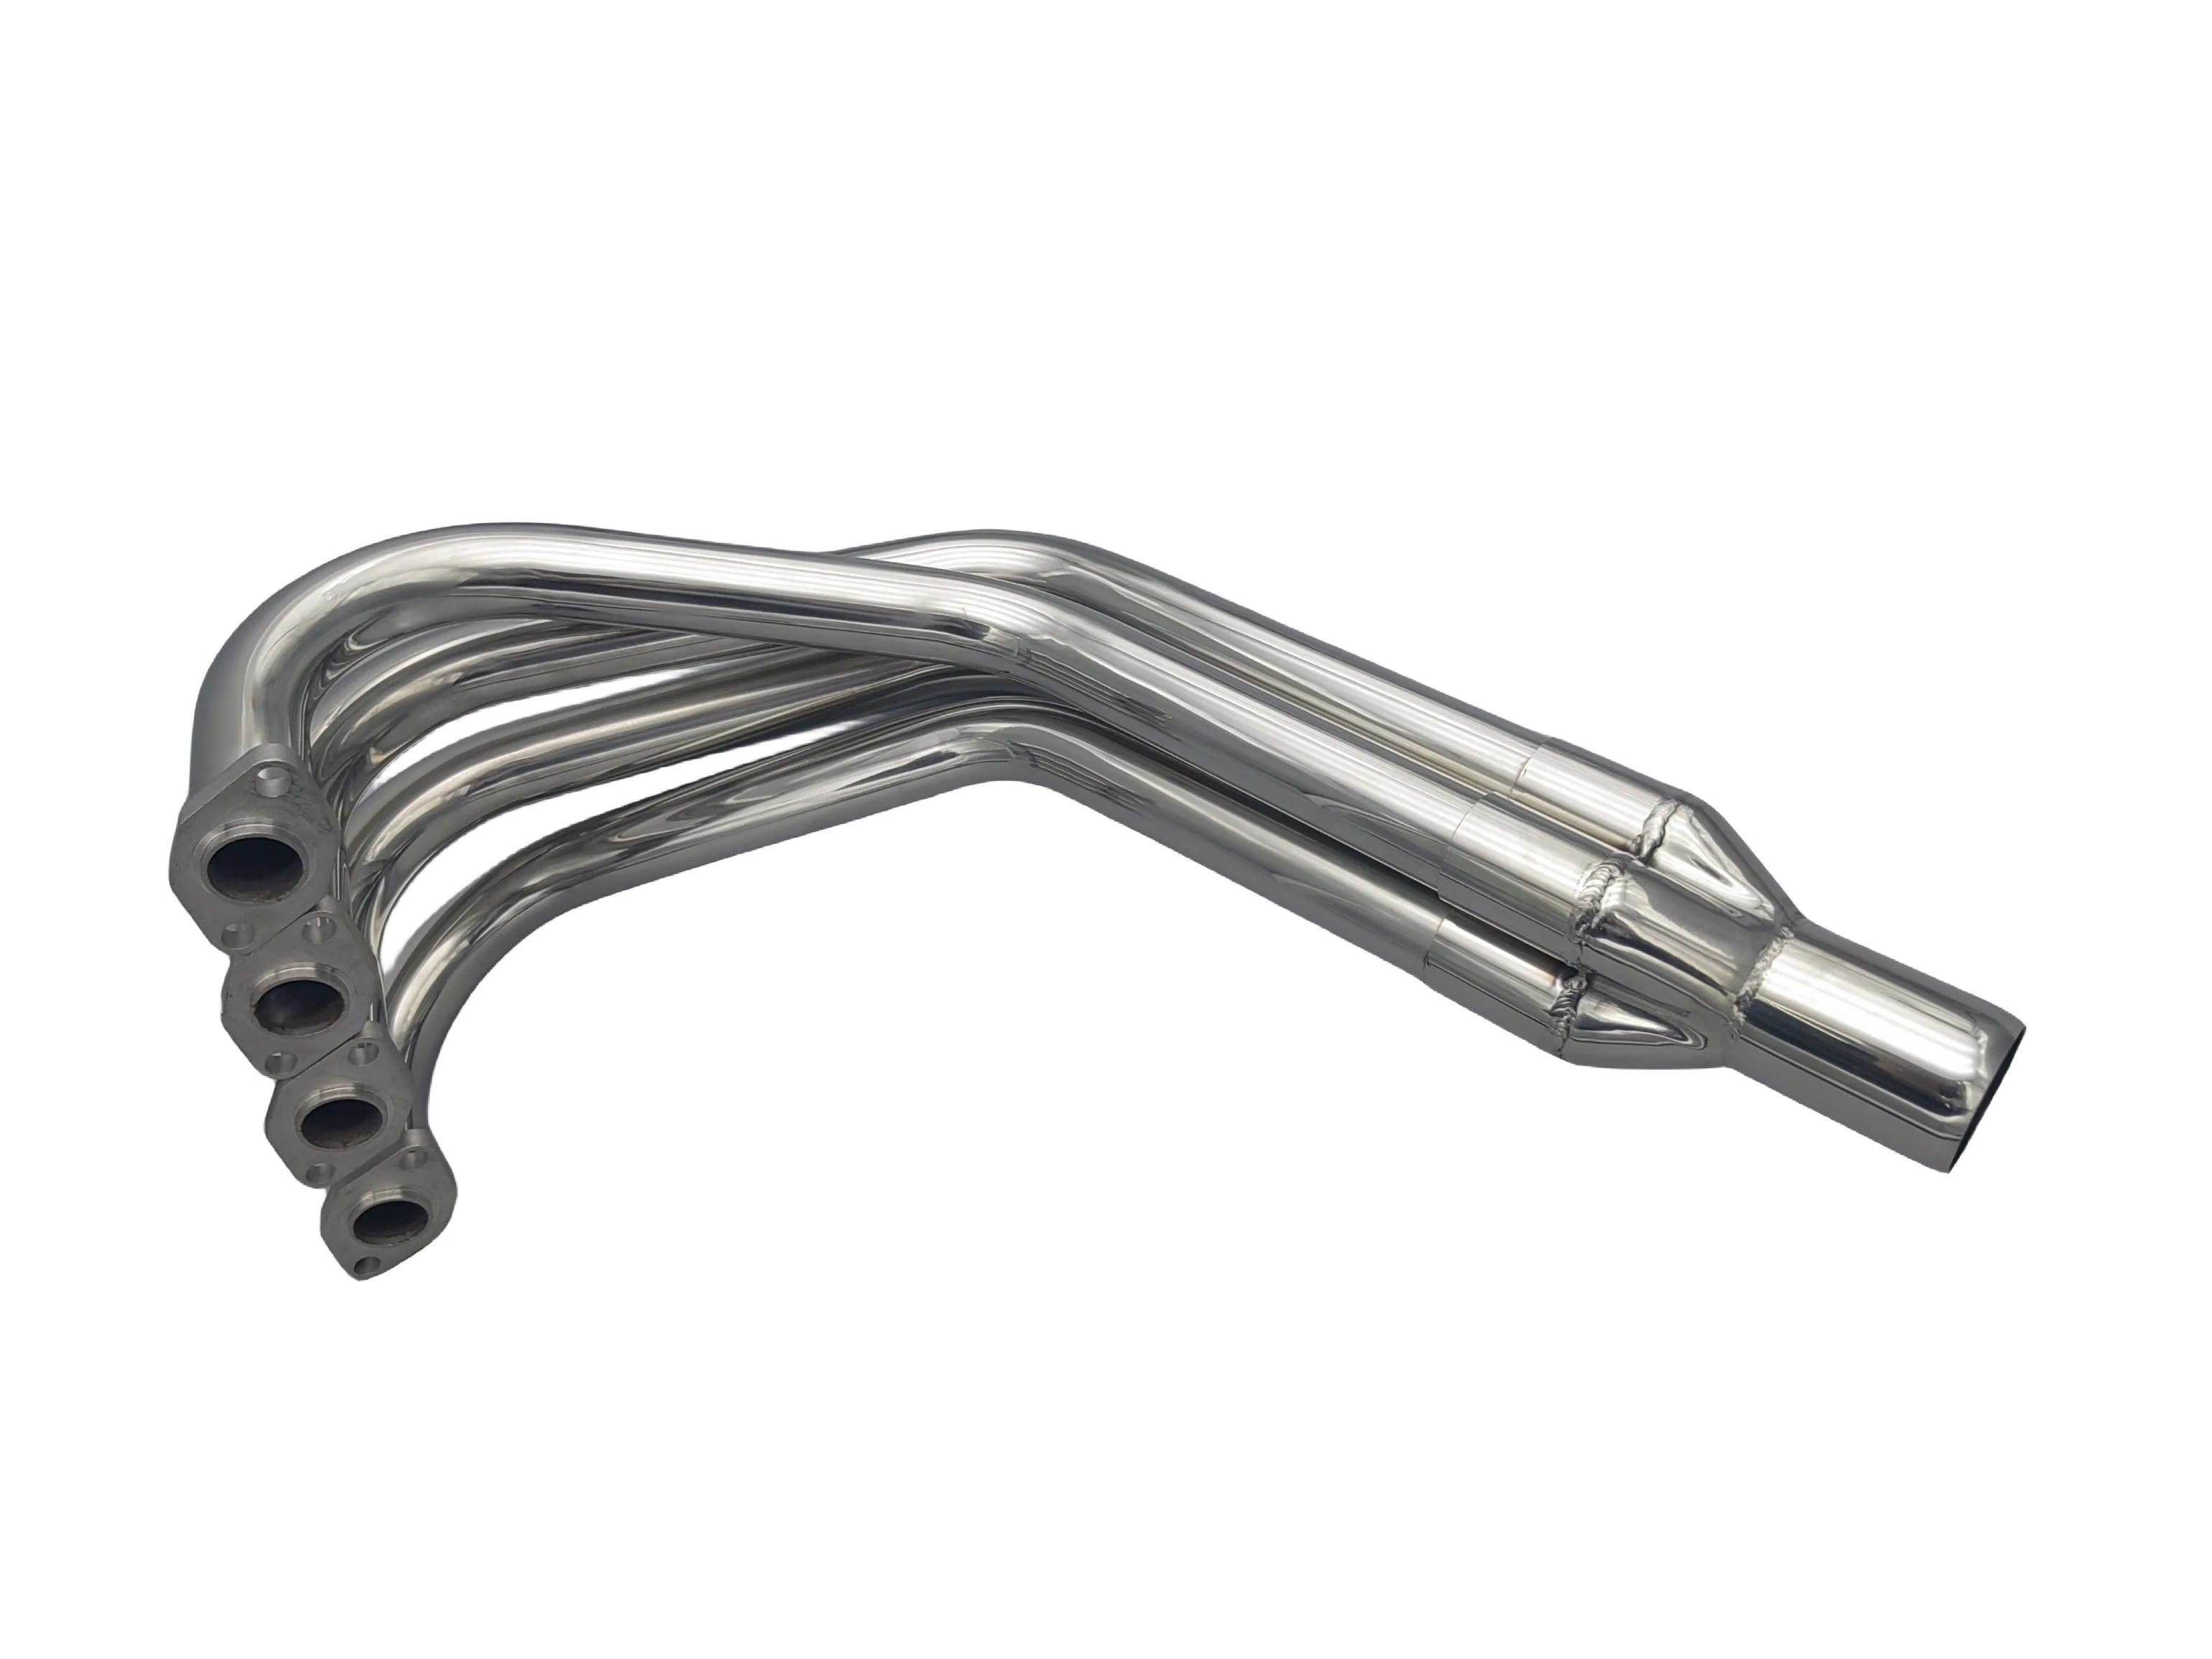 Fashion Motorcycle Exhaust System Stainless Steel Muffler Pipe